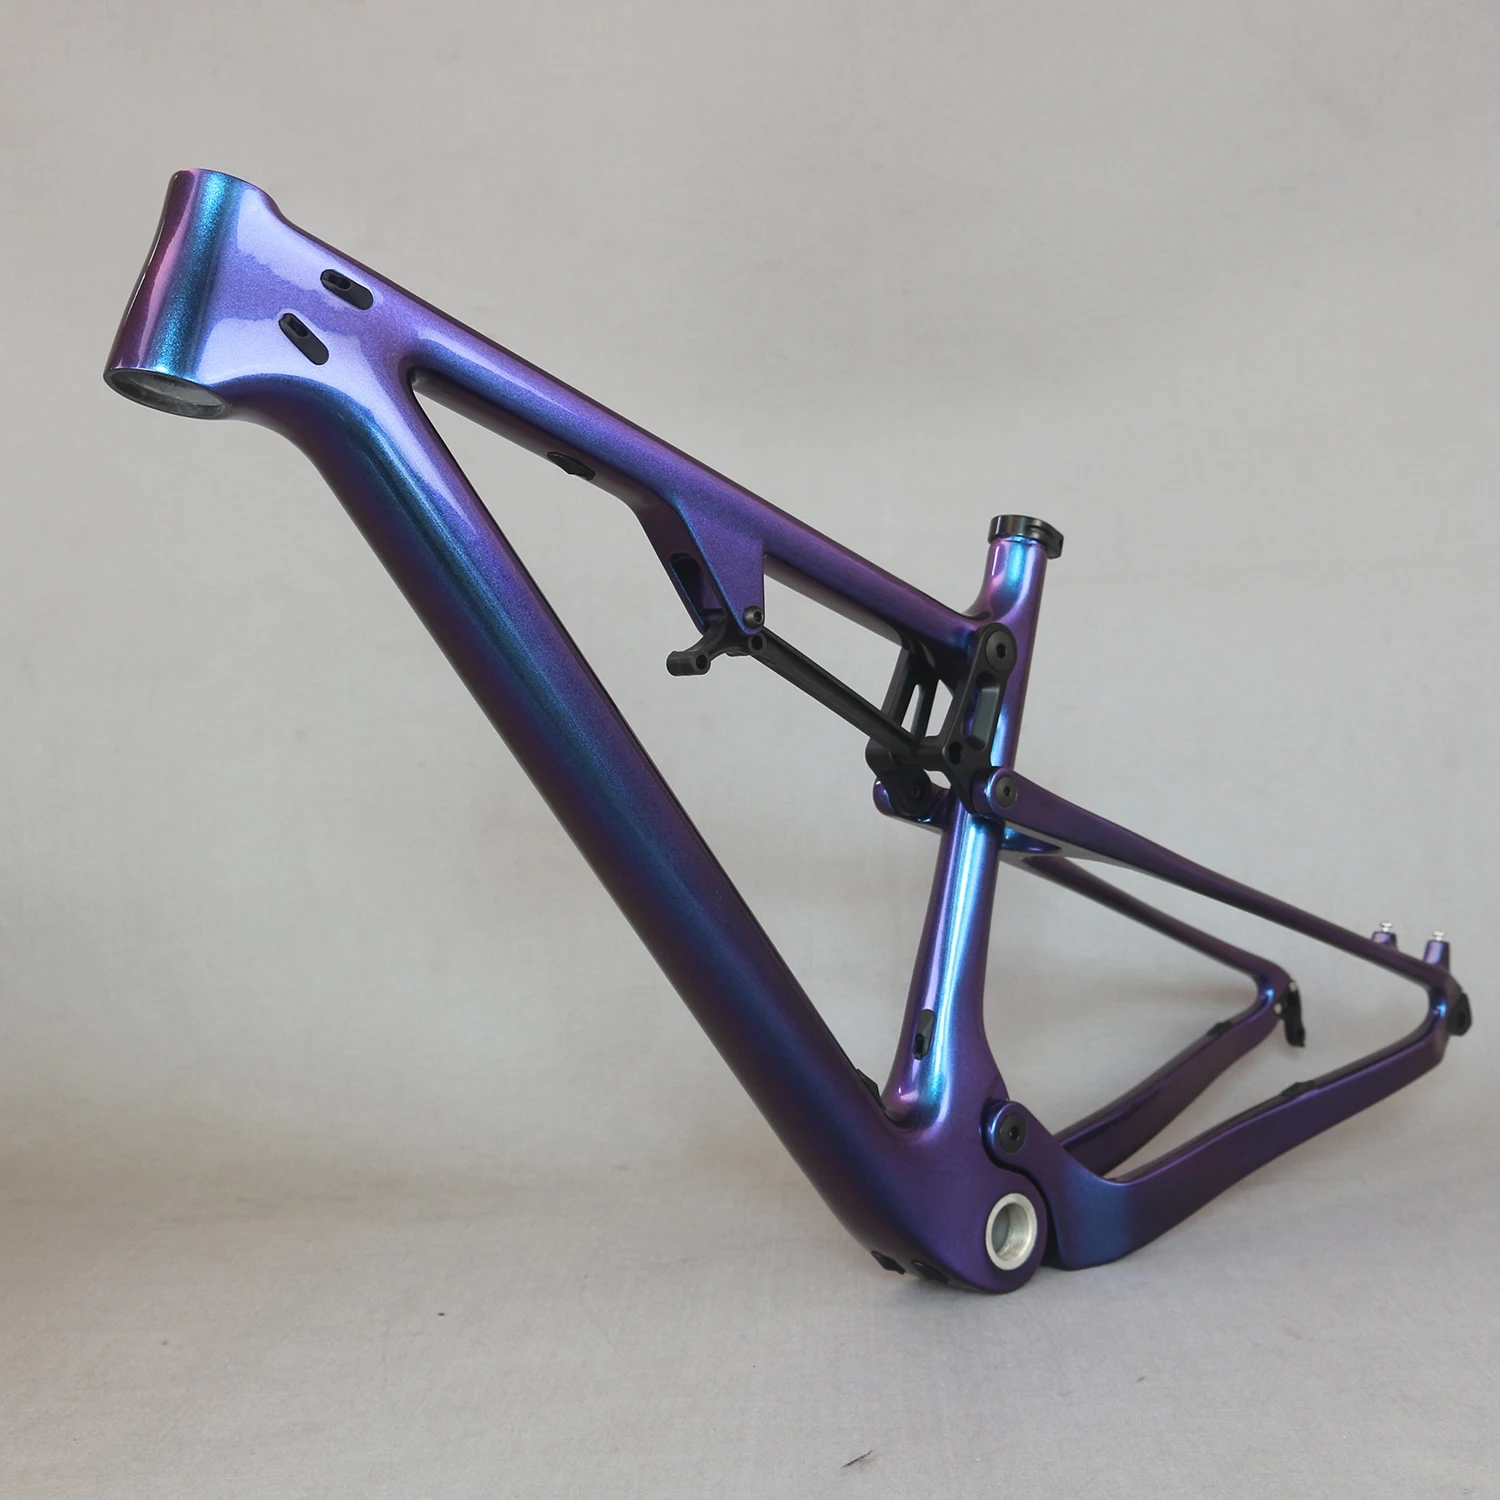 Bike parts new 29 Full Suspension MTB Bicycle Carbon frame 29er plus boosted suspension frame 148*12 bicycleframe